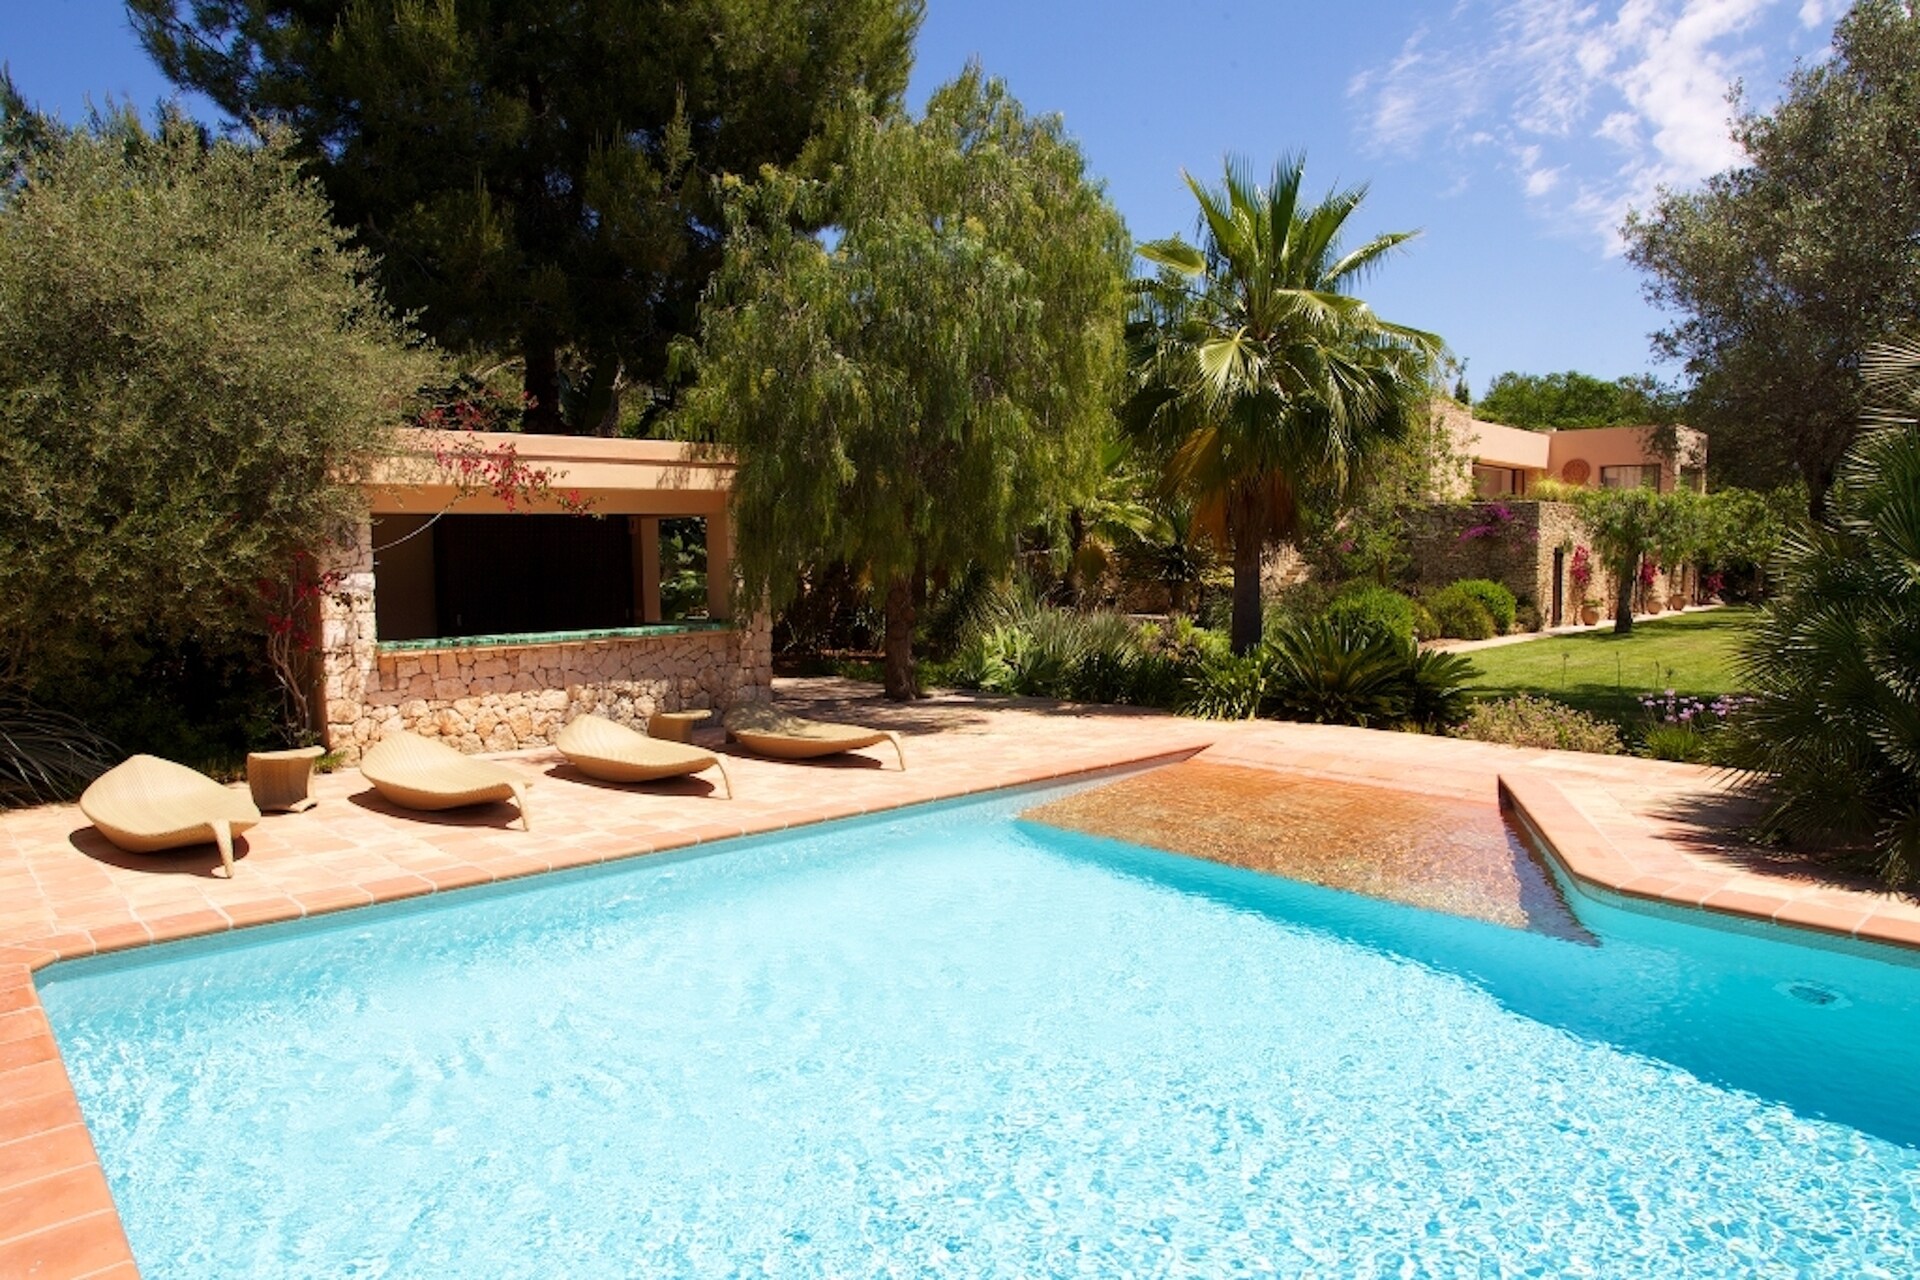 Property Image 2 - Rent this Luxury Villa with Private Pool, Ibiza Villa 1026